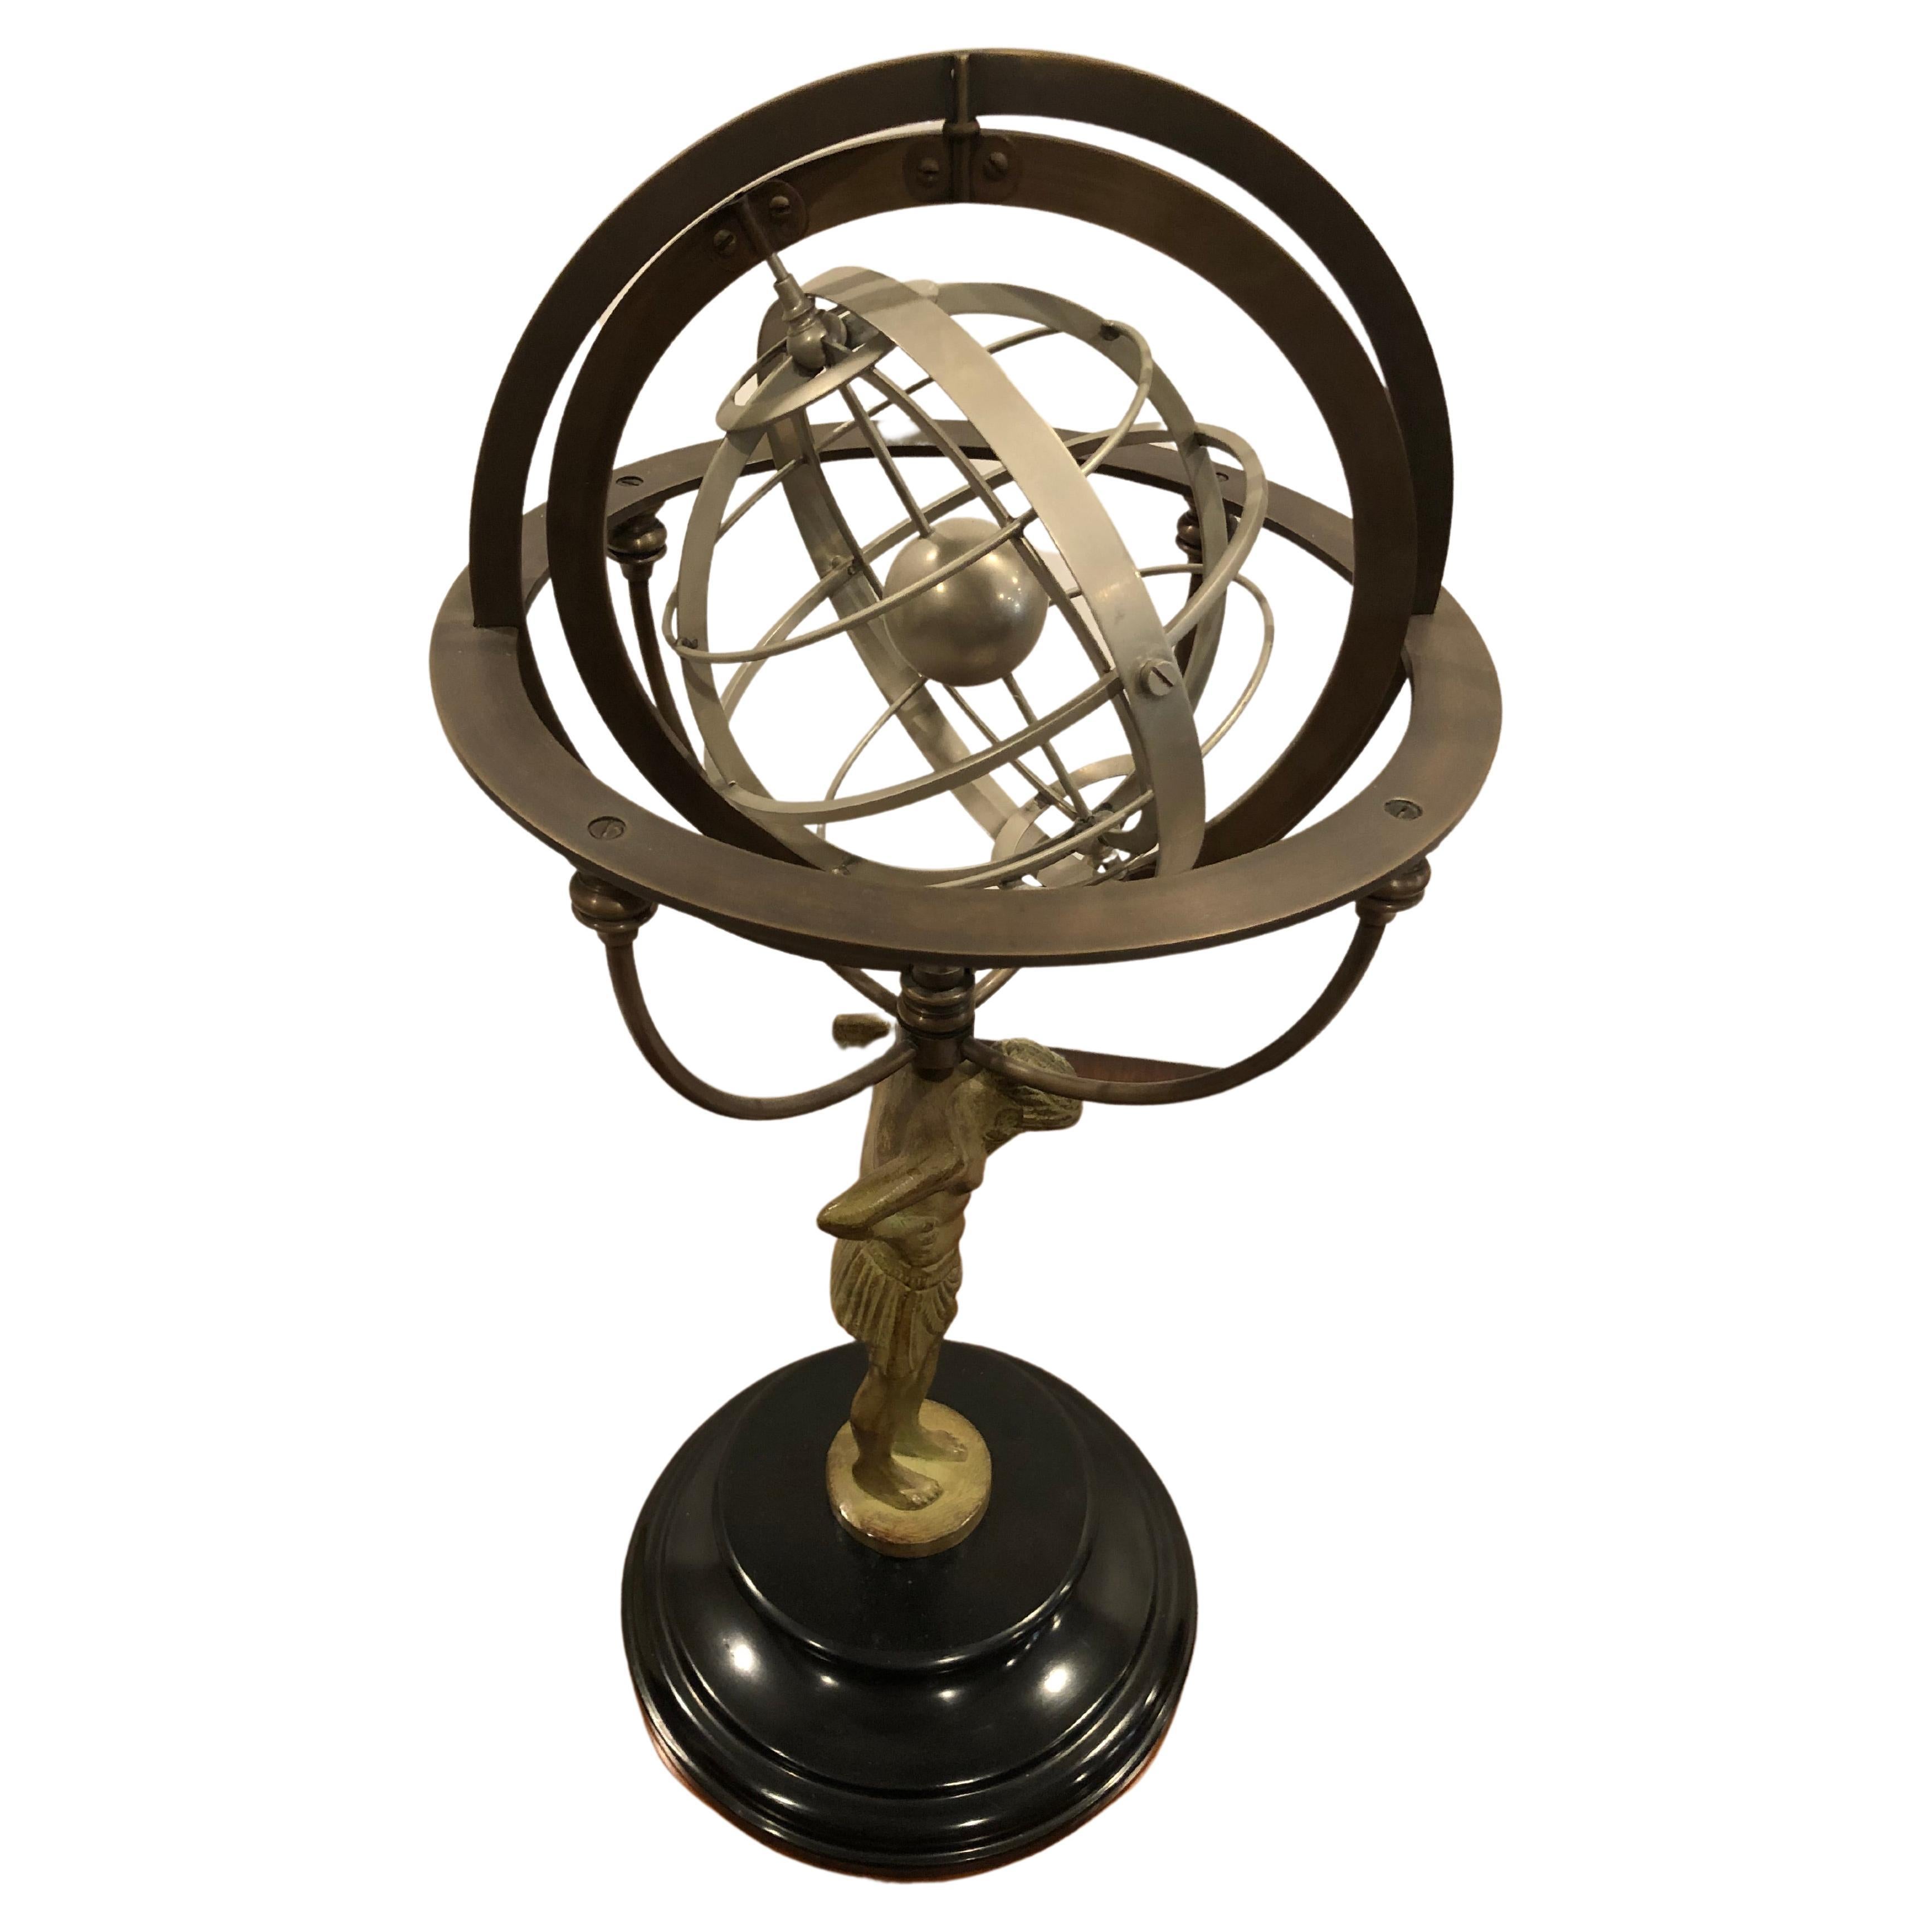 Impressive armillary sculpture in grey cast metal of a half clothed muscular man holding a round globe form on his shoulders. The round structure has a central solid ball and multiple open circular forms surrounding it. Round base is solid black.